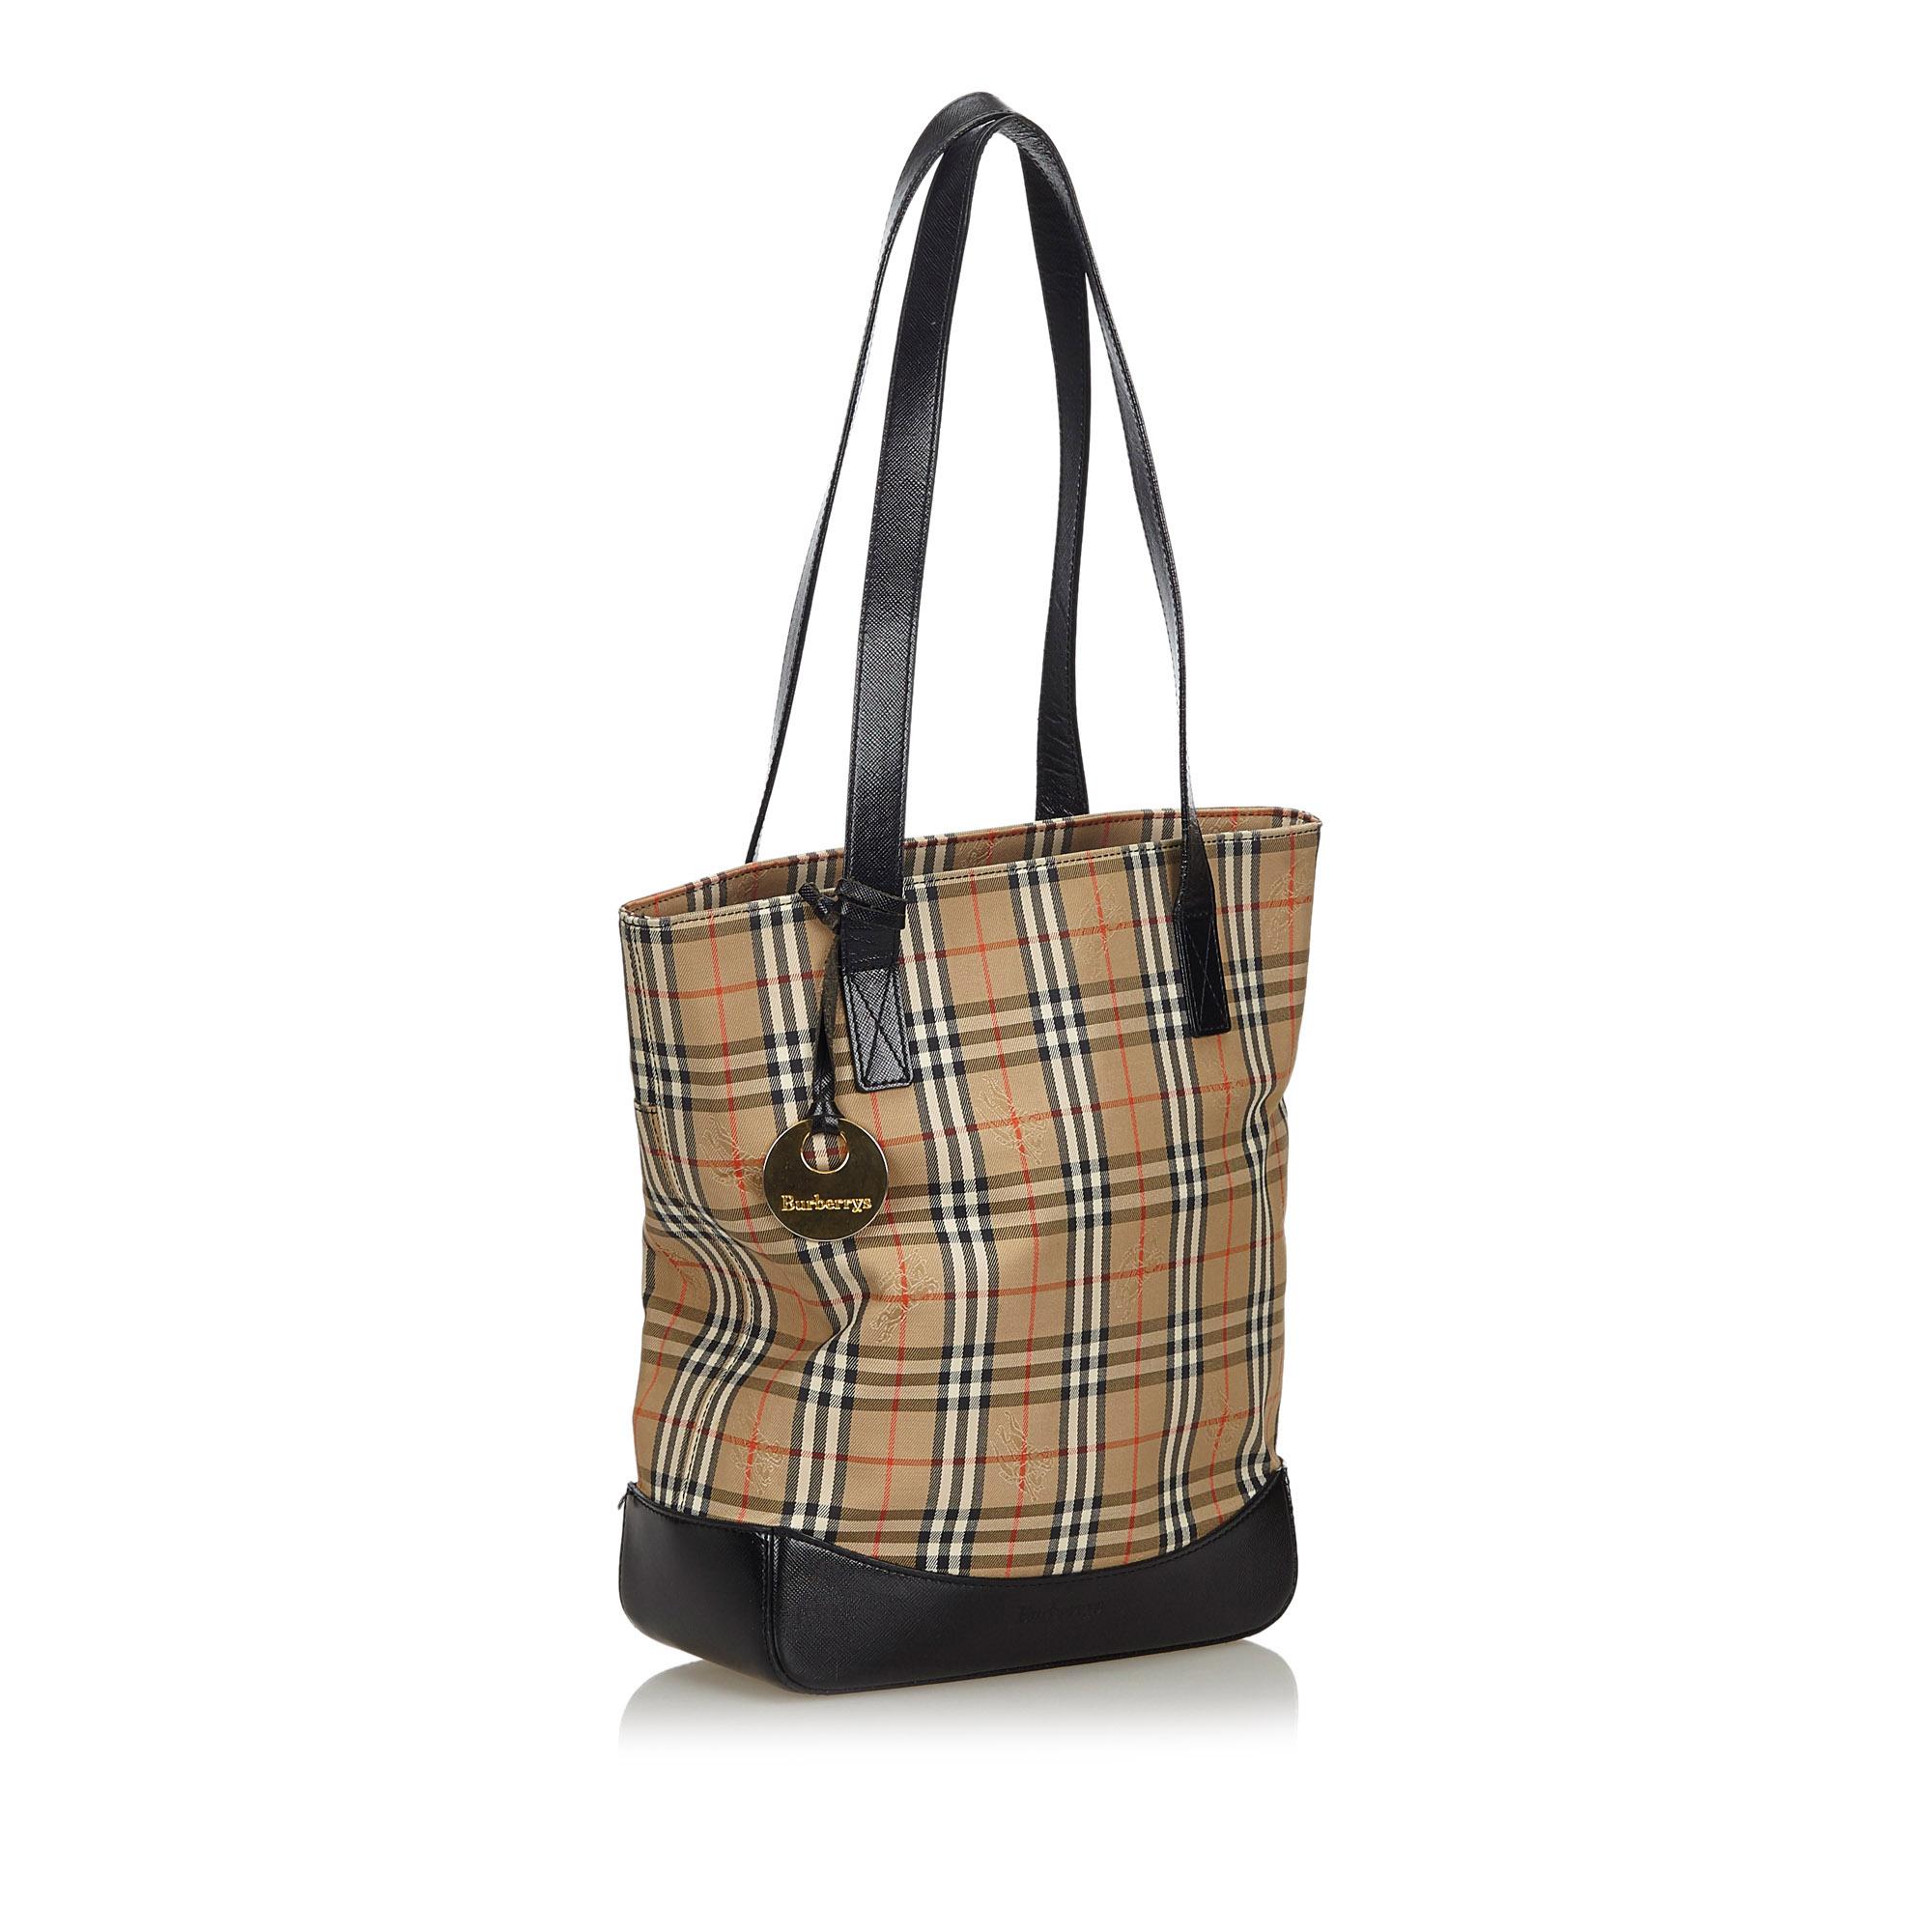 This tote bag features a canvas body with leather trim, a flat leather straps, an open top with a magnetic snap button closure, and an interior zip pocket. It carries as B+ condition rating.

Inclusions: 
This item does not come with